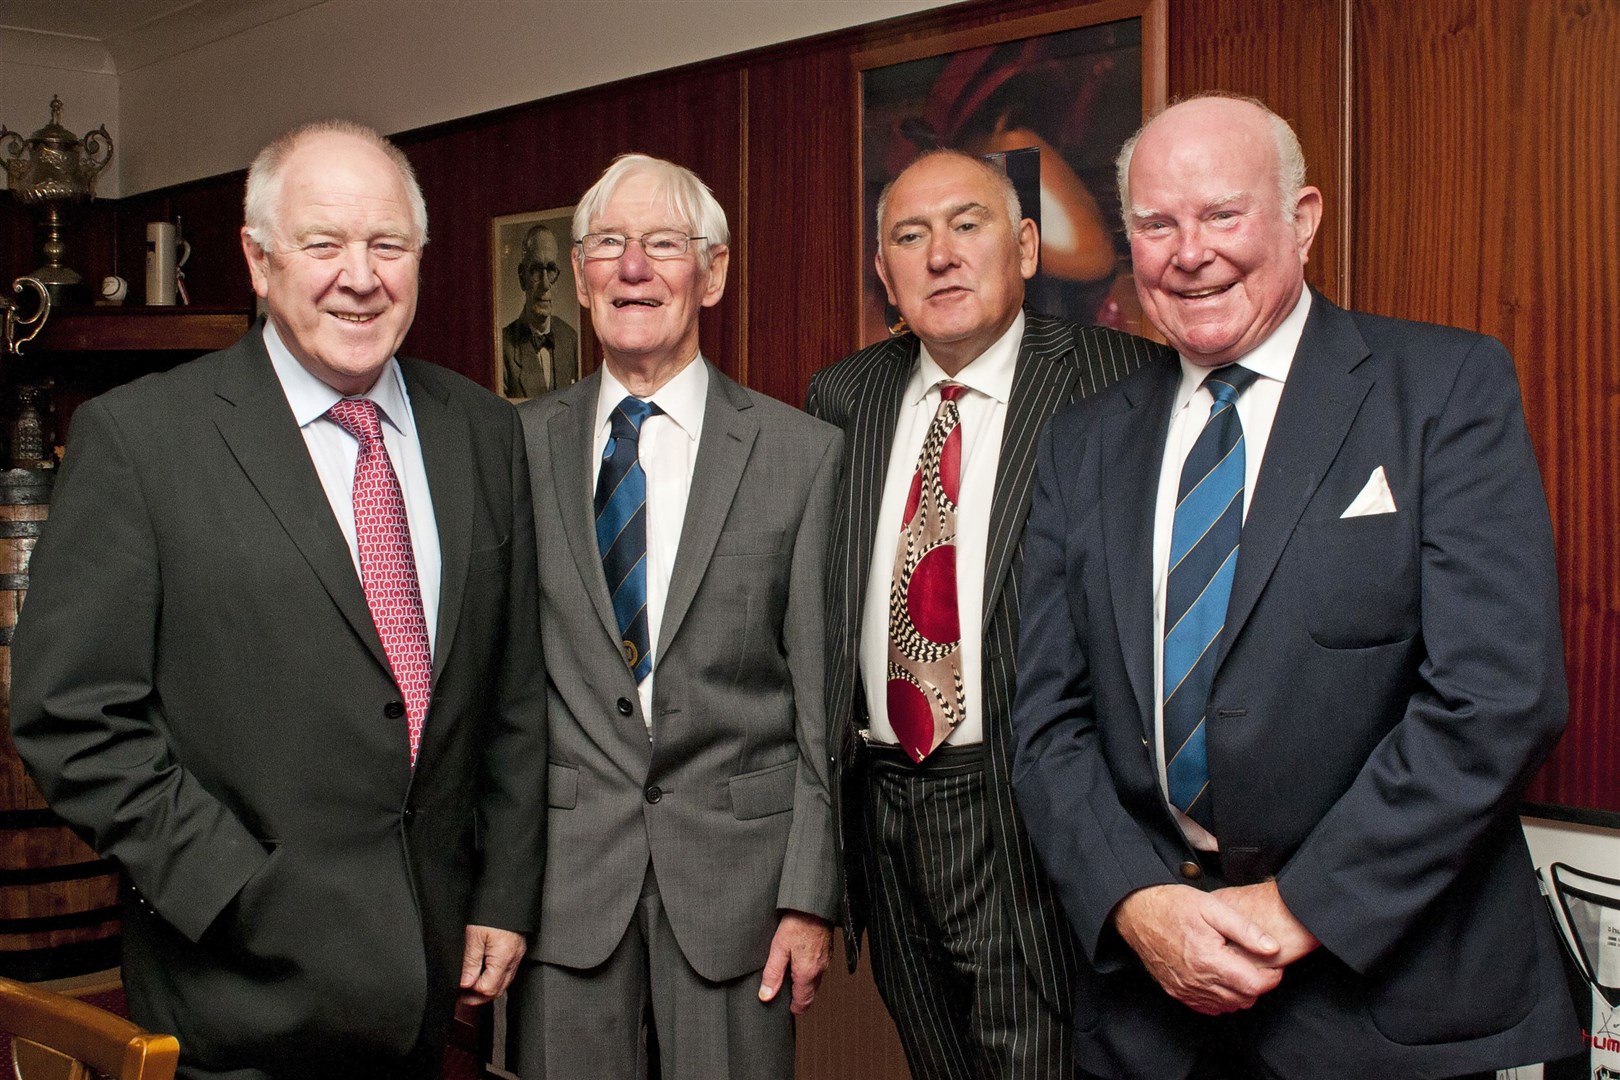 Elgin Boys' Club 50th anniversary dinner. Left to right: Craig Brown, Jimmy George, Jimmy Stirling and Mike Christie.